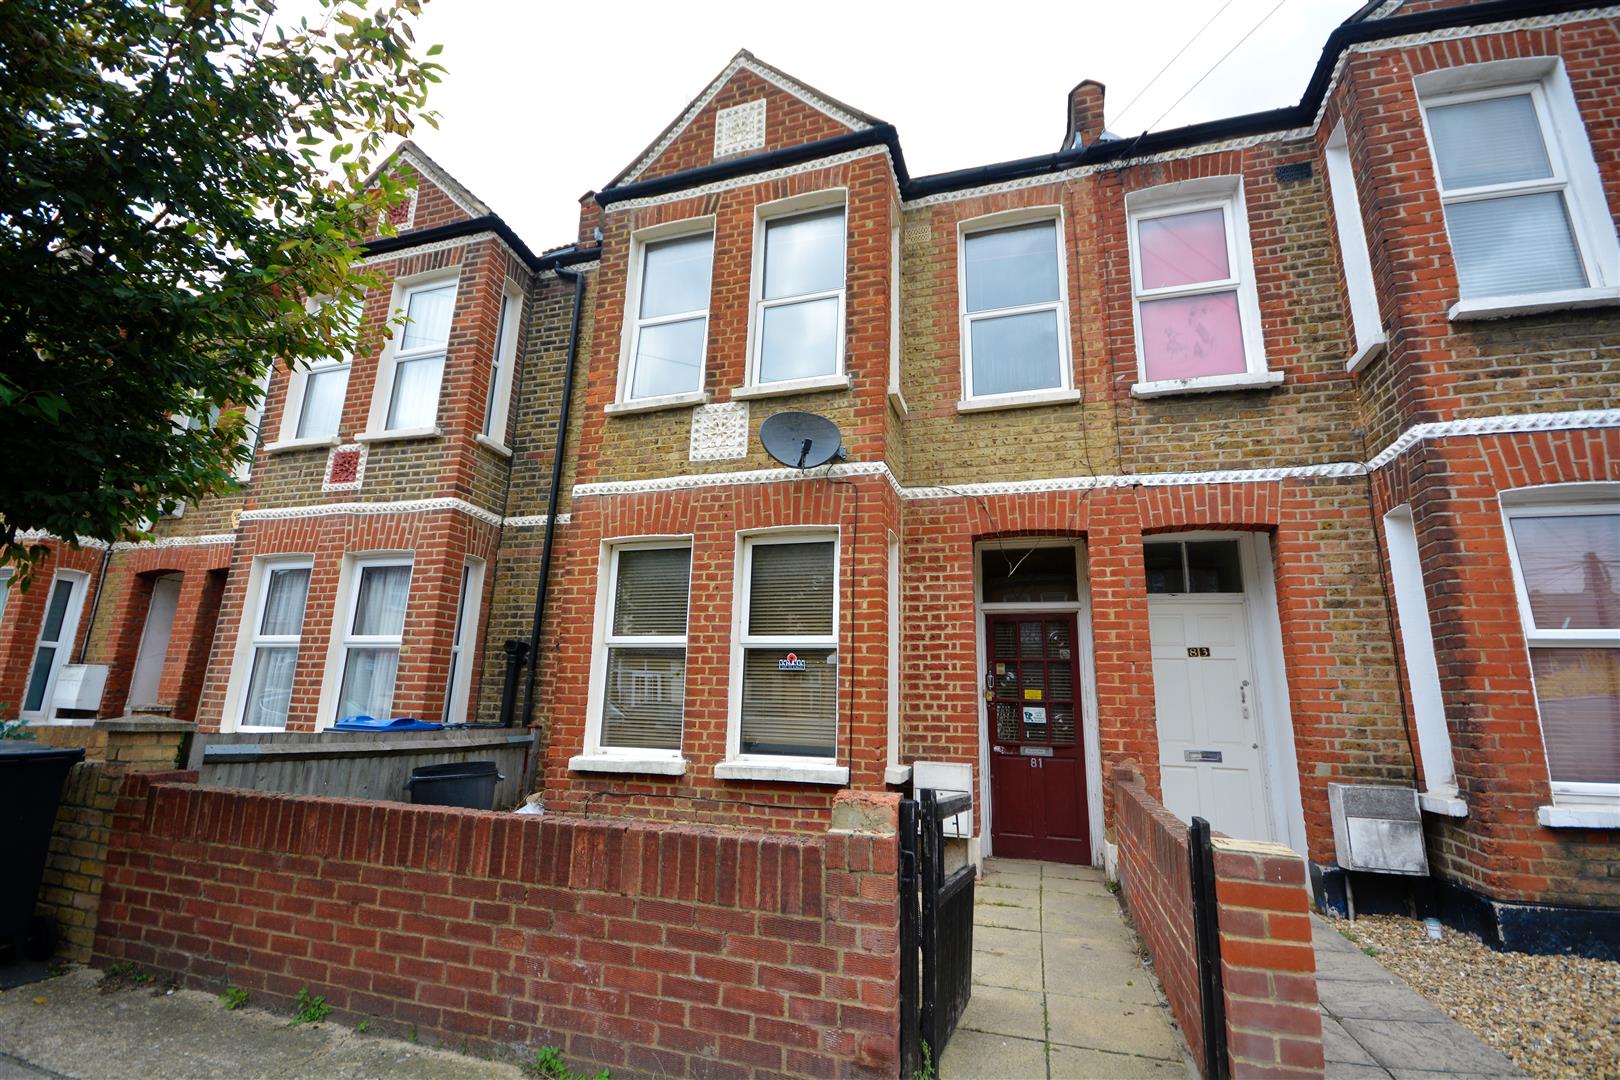 Fortescue Road, Colliers Wood